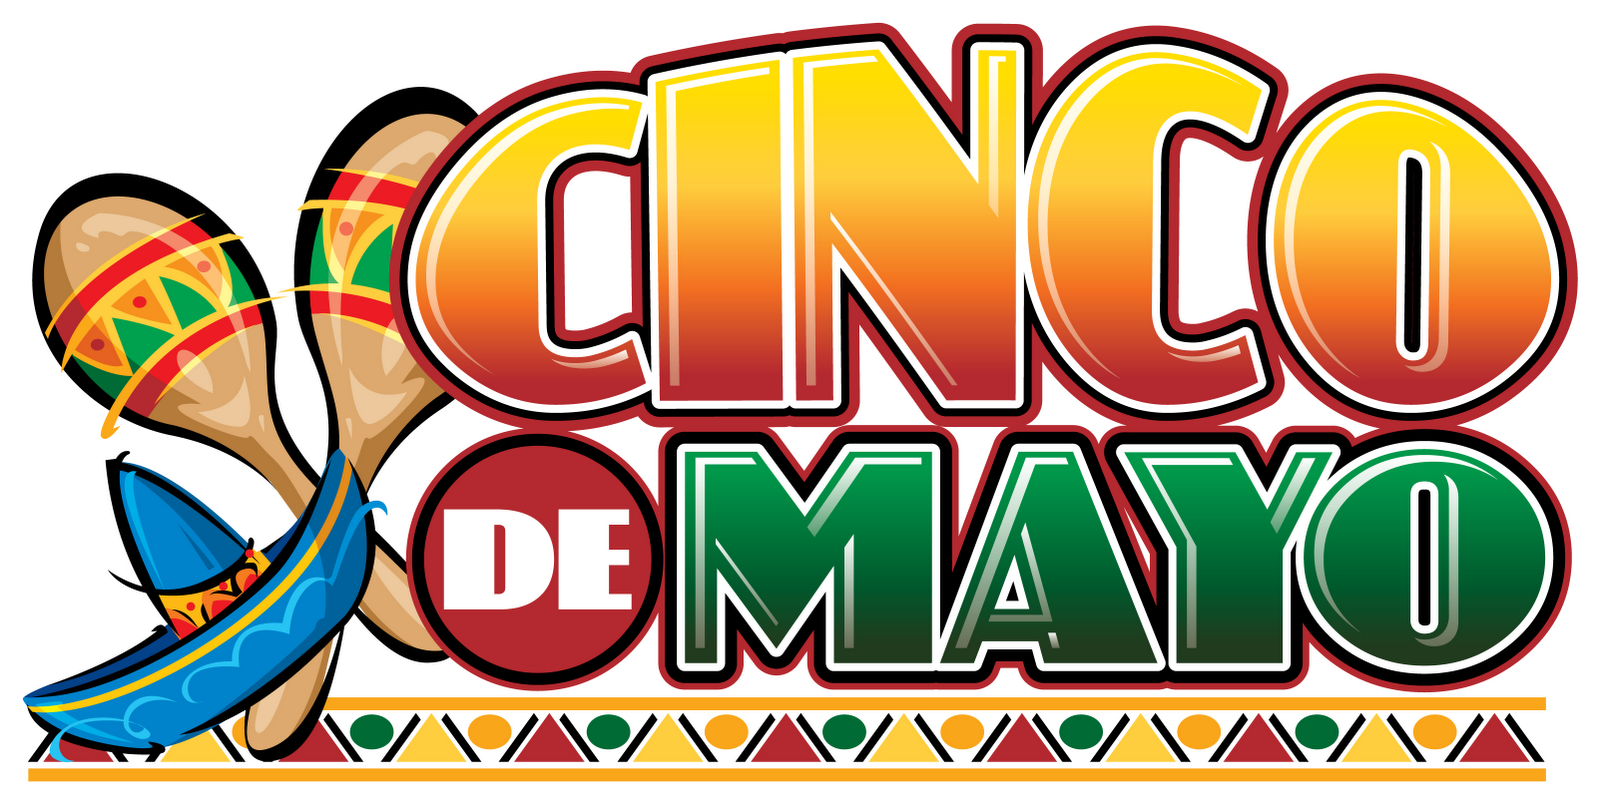 Cinco de Mayo Dinner - Youth and Congregational Life